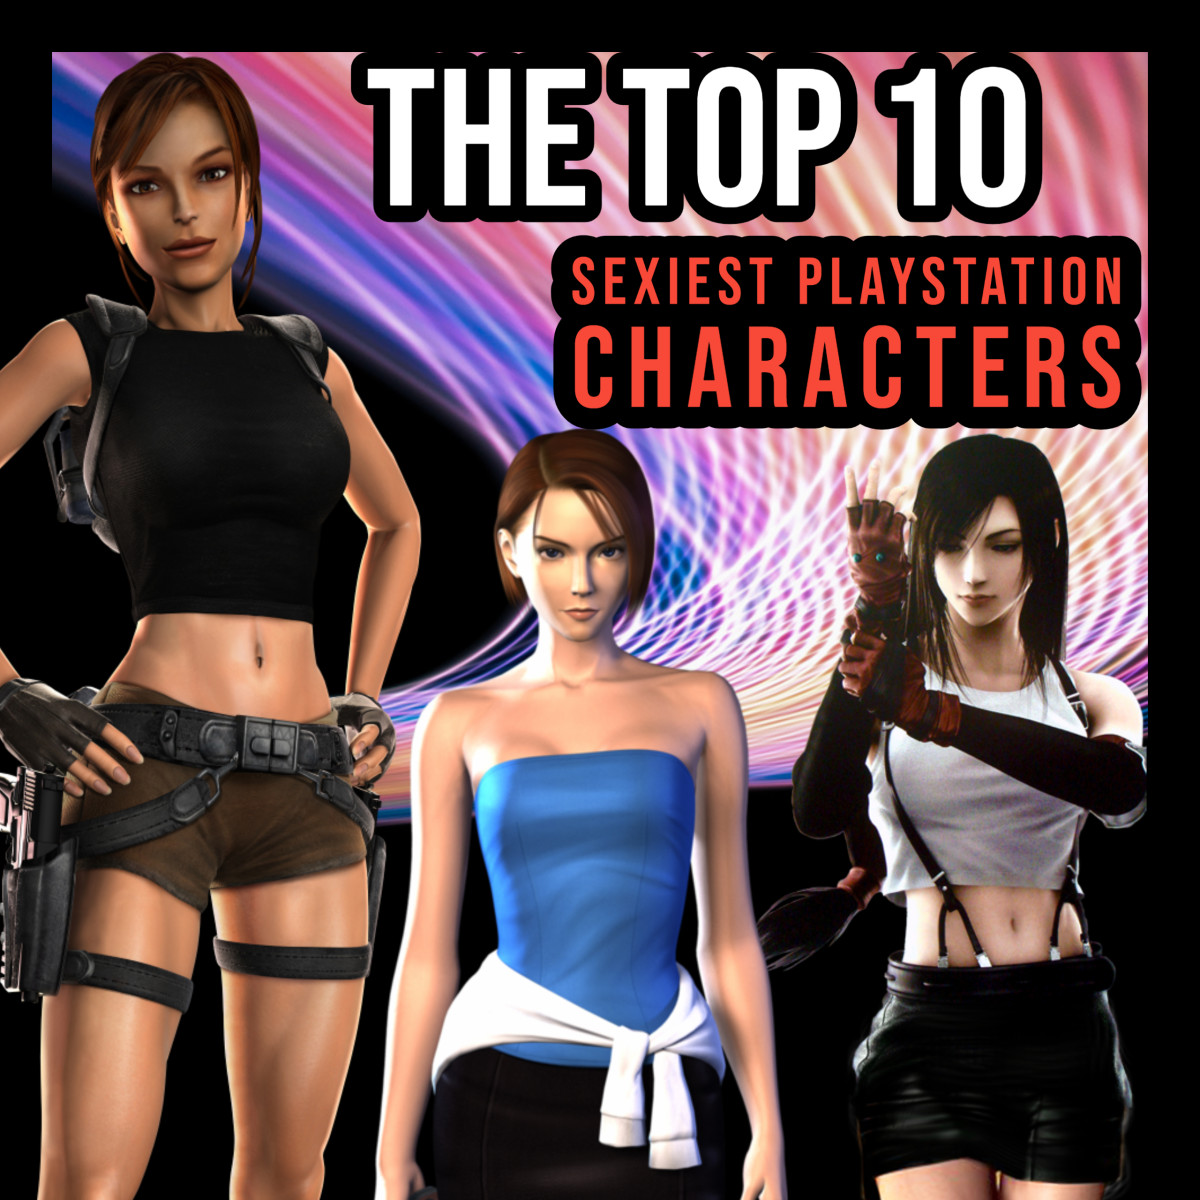 From Carmelita Fox to Lara Croft, this article ranks the 10 sexiest PlayStation characters of all time!